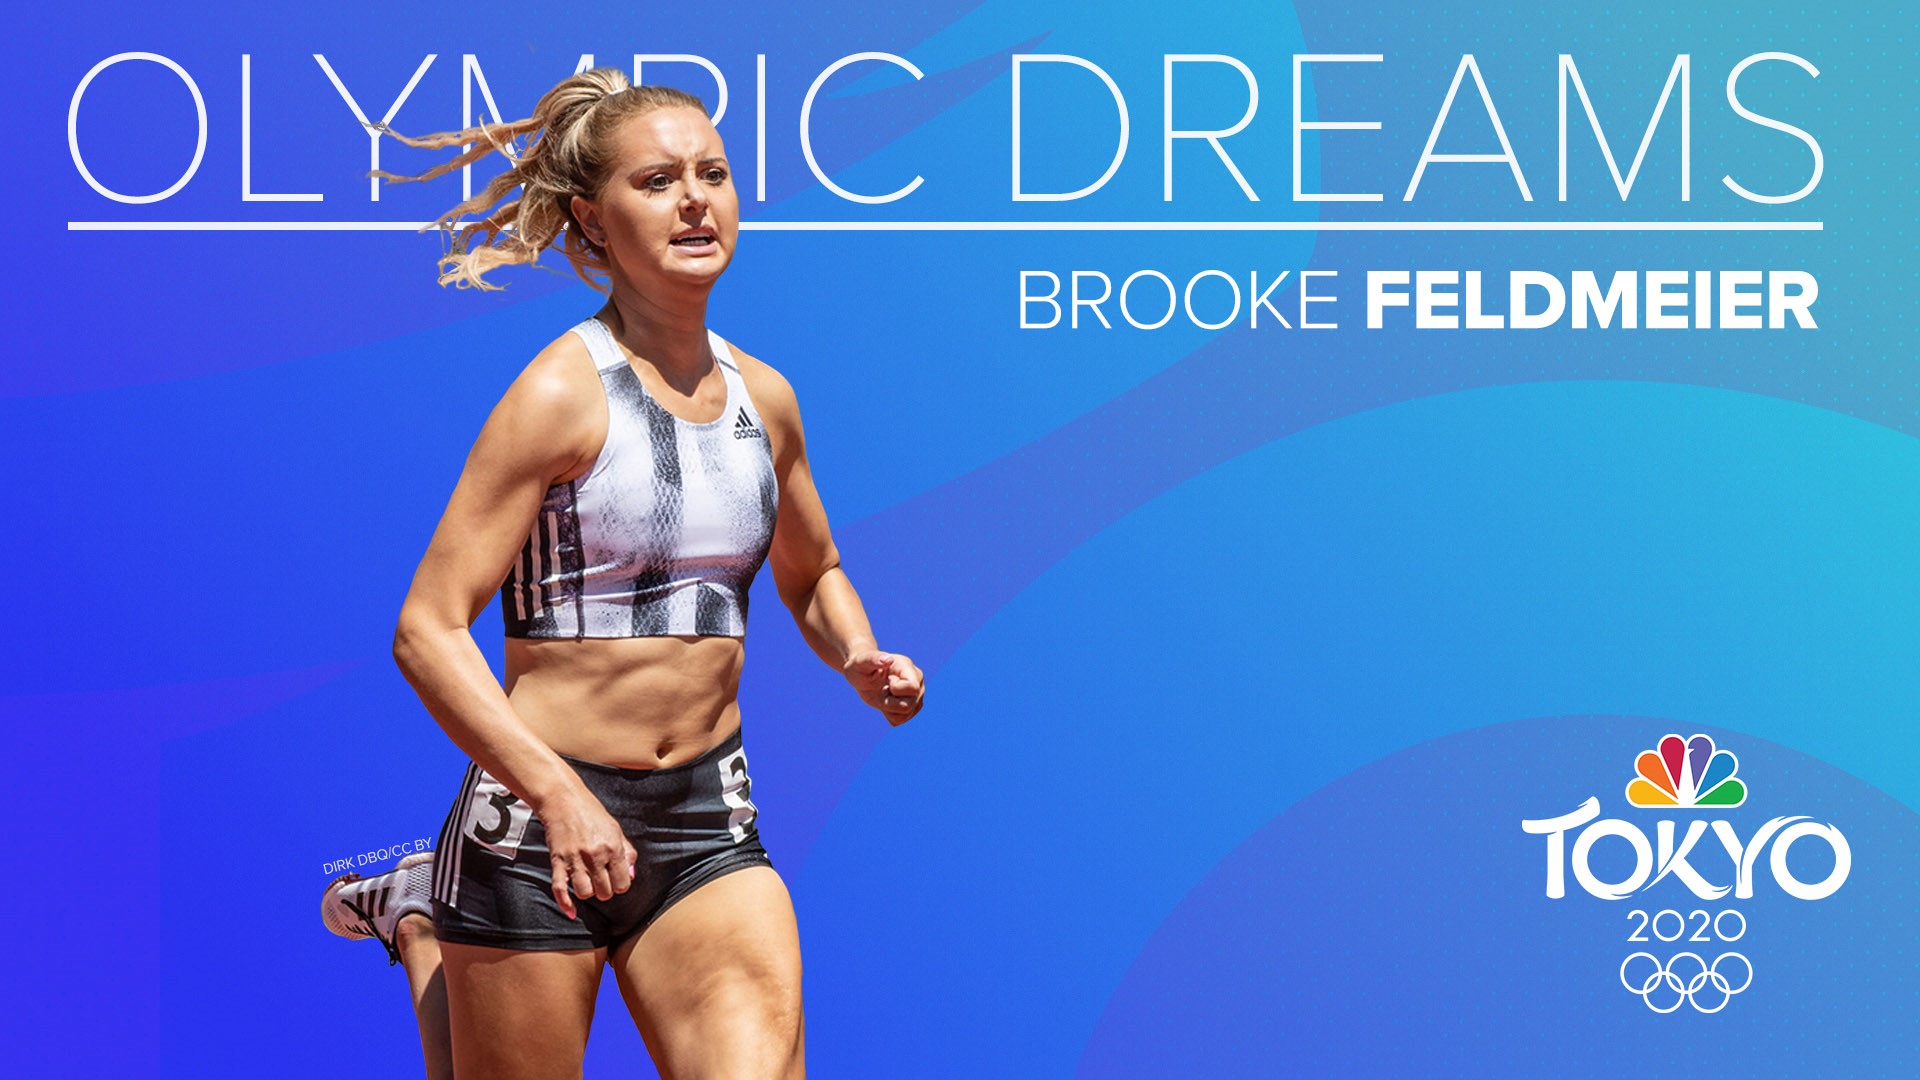 Brooke Feldmeier, of Olympia, is competing this week for one of the top three spots to qualify for the Tokyo Olympics in the 800 meter race.